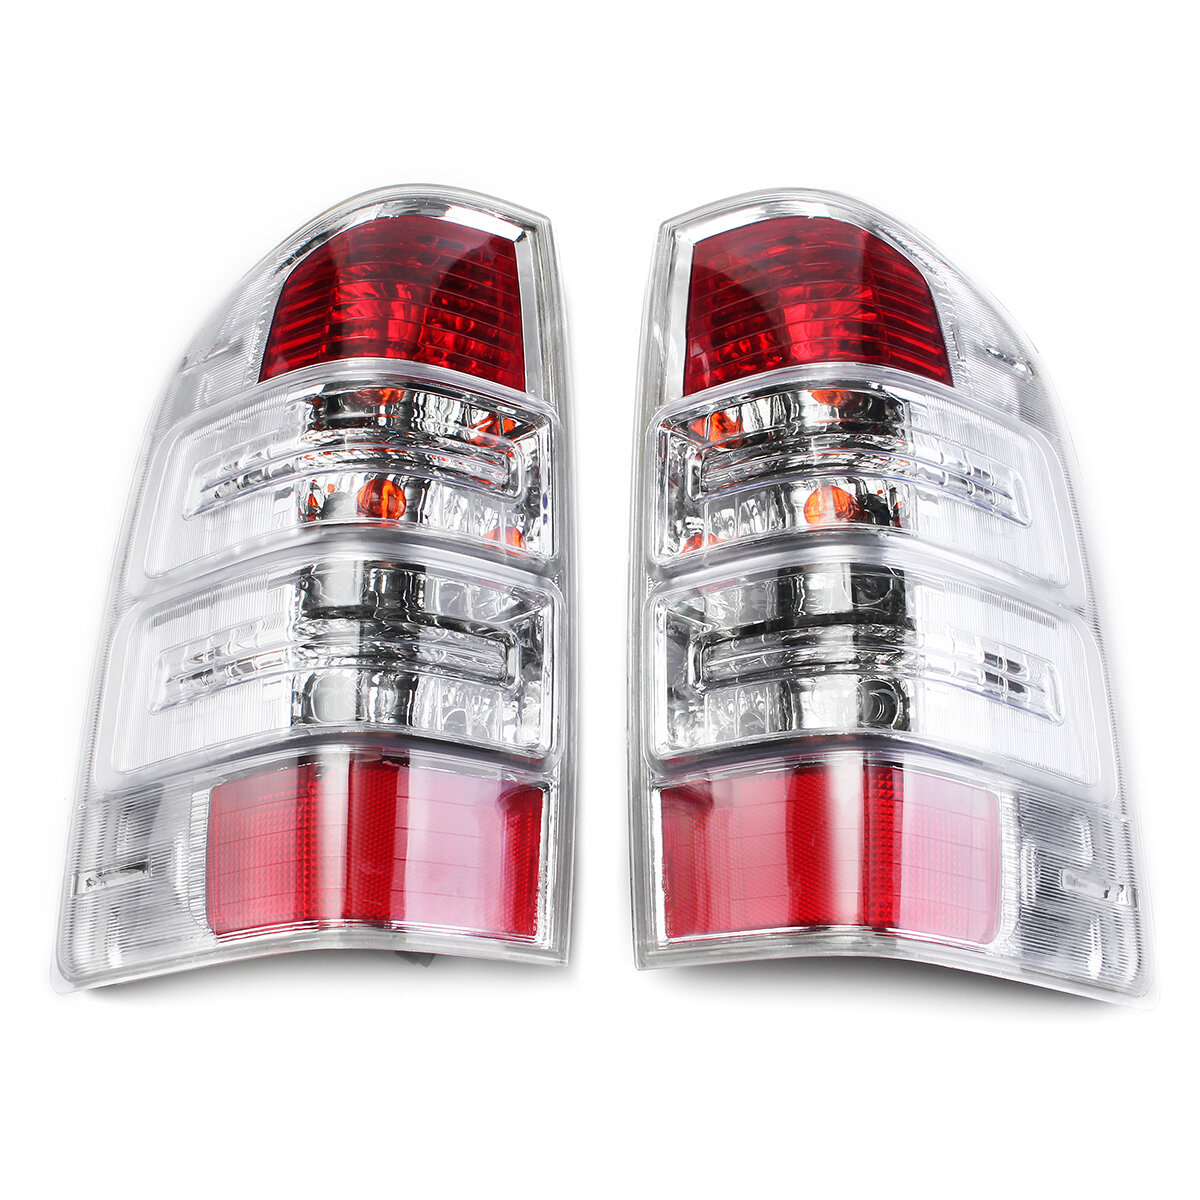 Car Rear Tail Light Assembly Brake Lamp with Bulb Wiring Harness Left/Right for Ford Ranger Pickup U